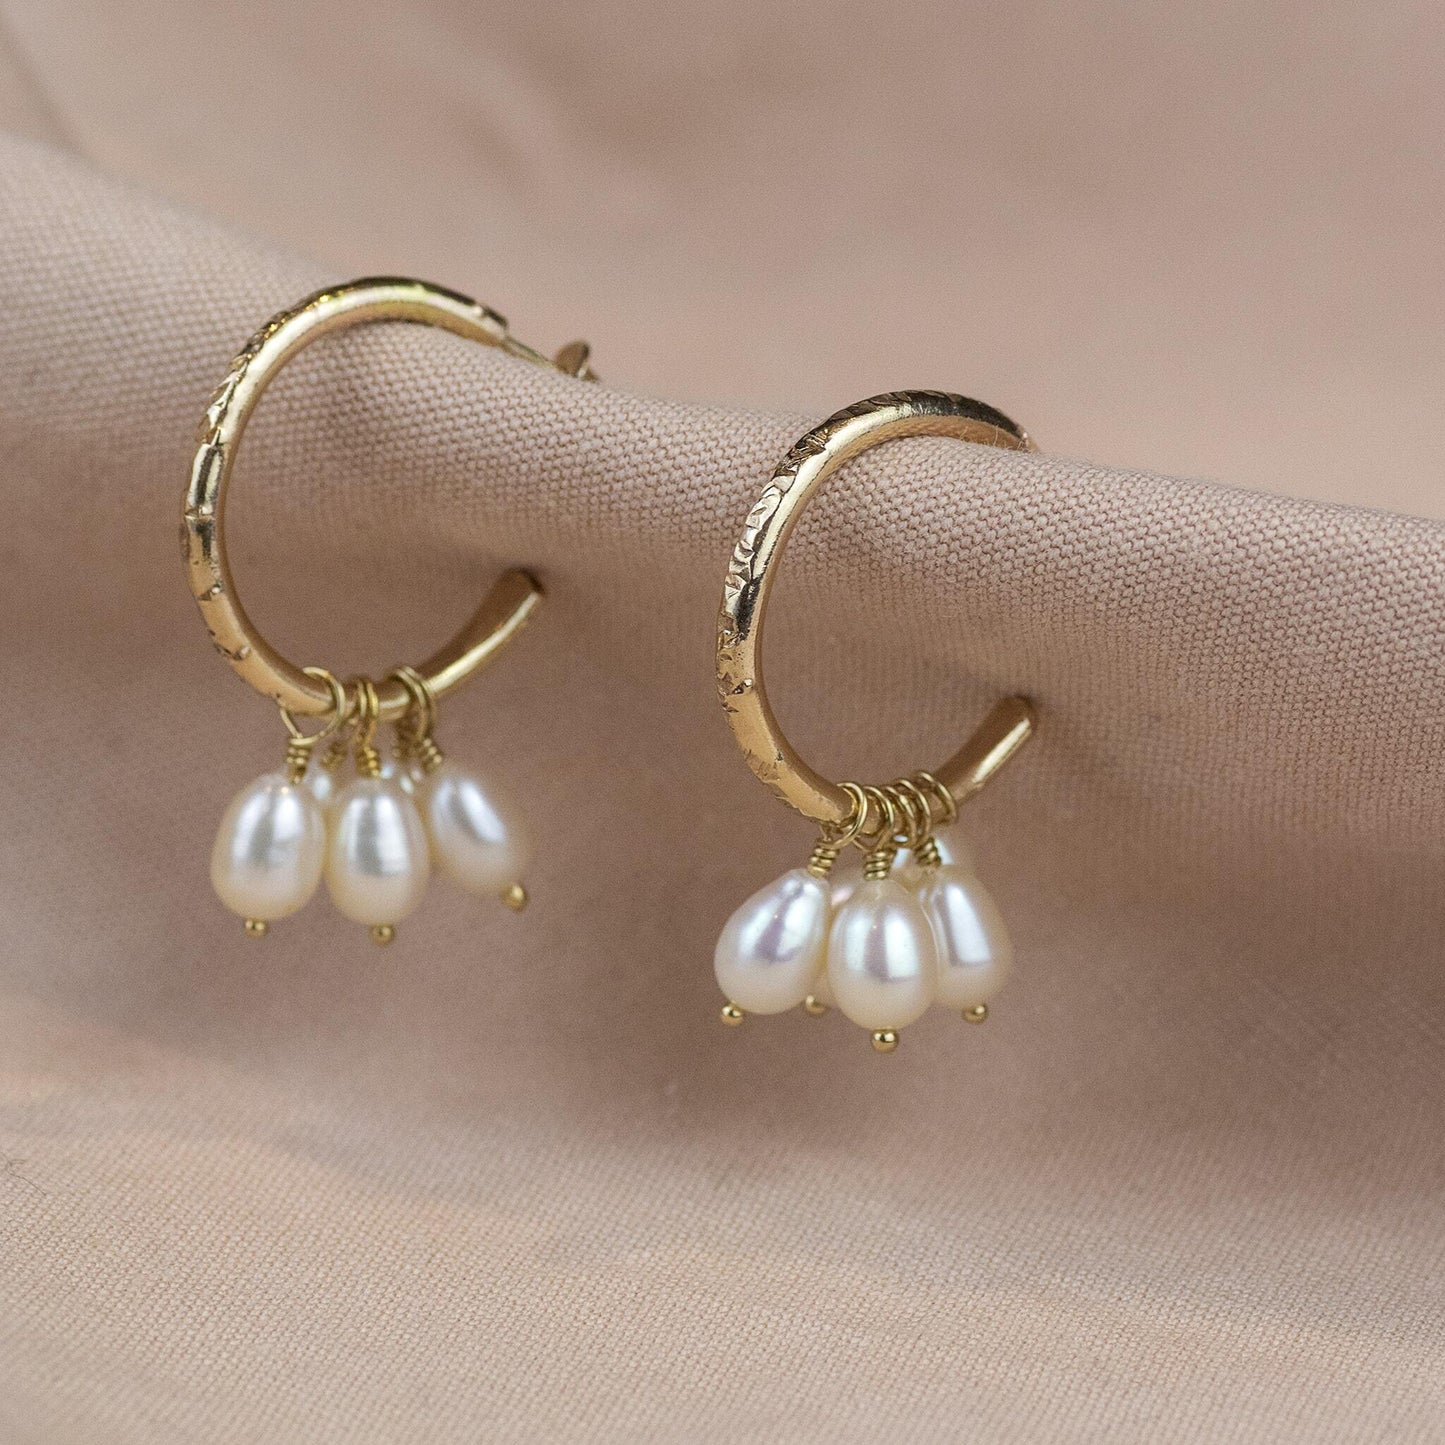 Petite Gold Hoops with Pearl Cluster - 2cm